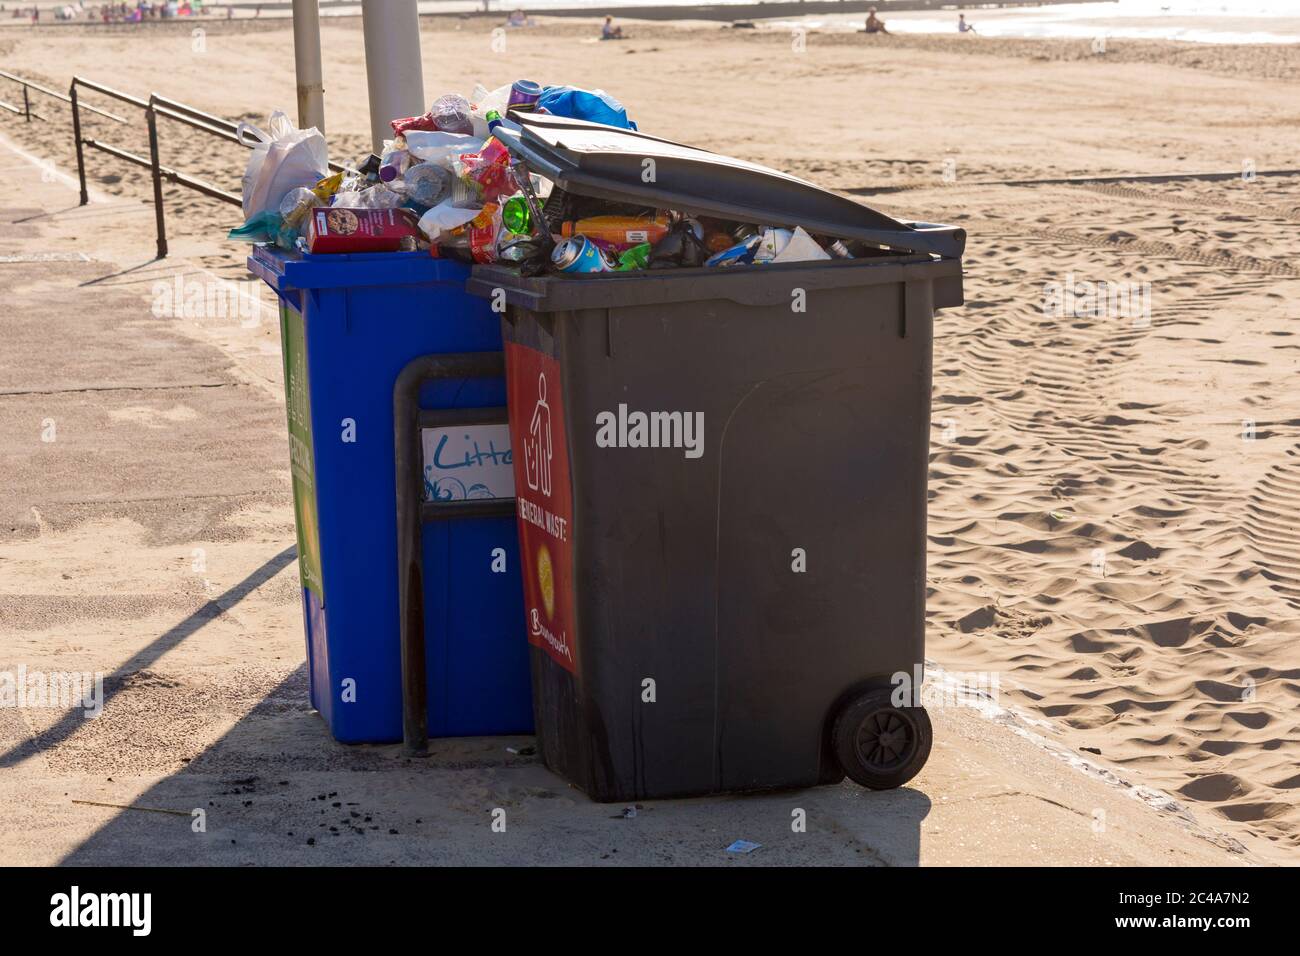 Rubbish left behind on the hottest day of the year during heatwave at Bournemouth beach, Dorset UK in June - litter garbage Stock Photo